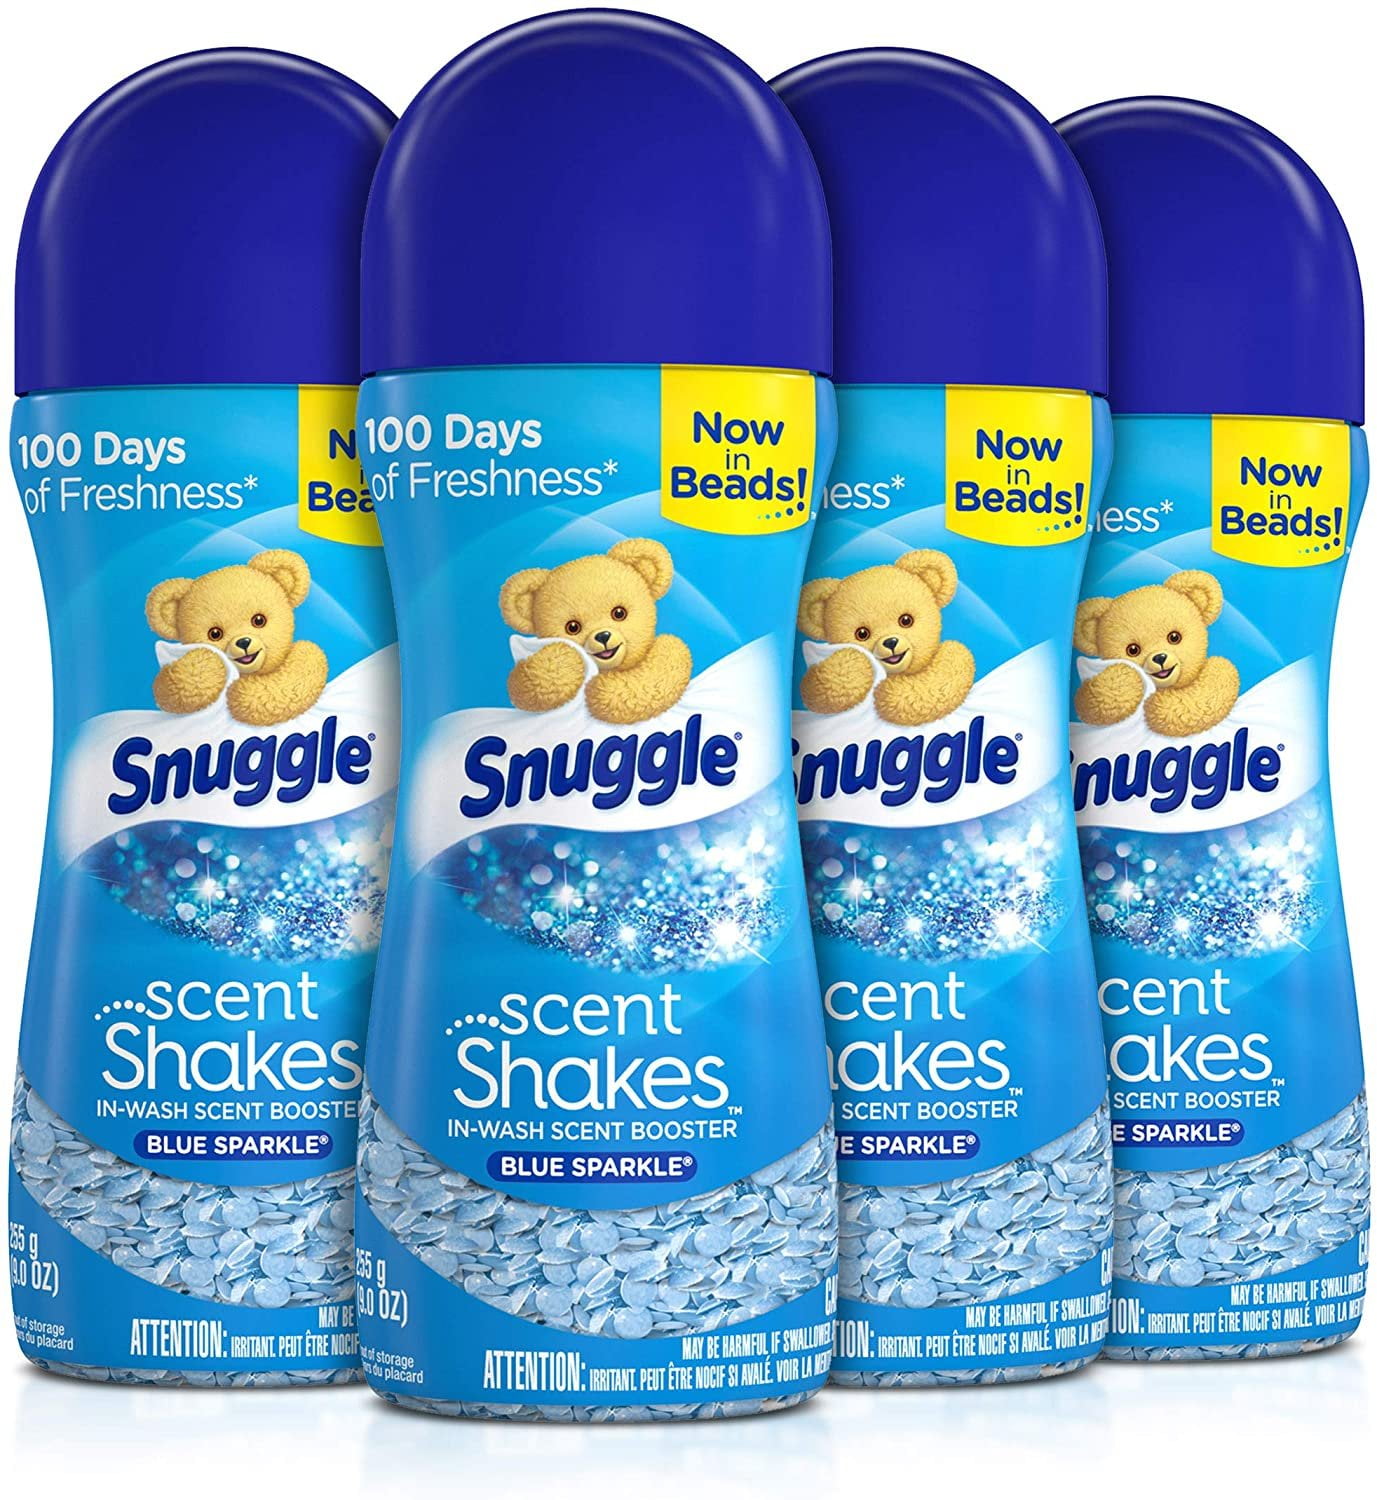 Snuggle Scent Shakes in-Wash Scent Booster Beads, Blue Sparkle, 9 Ounce (Pack of 4)